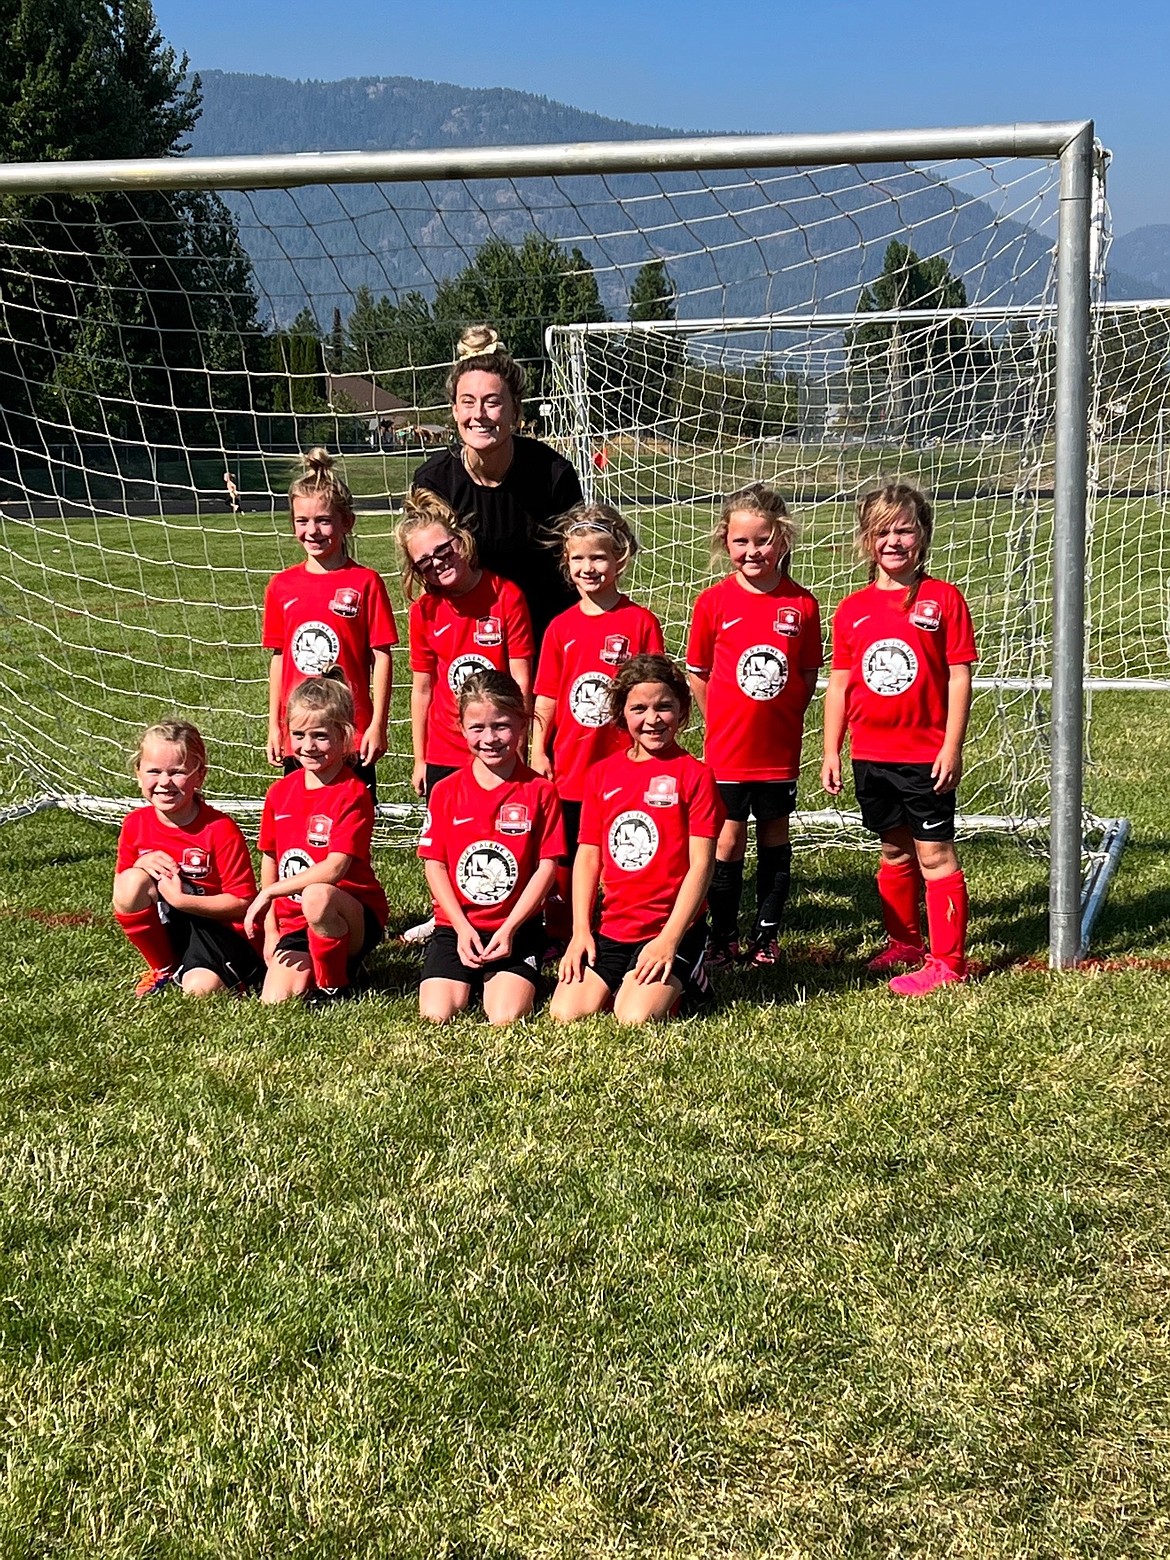 Courtesy photo
The Thorns 2015 girls soccer team won two games at the Pend Oreille Cup in Sandpoint last weekend. The Thorns were headed to the finals, but it was canceled due to air quality. In the front row from left are Kimberlyn Gatten, Lacey Bitnoff, Cielle Ellis, and Hailey Gurgel; back row from left, Beckett Murphy, Kit Fields, Lola Fremouw, Charlotte Langer and Liviana Staeheli; and rear, coach Erin Ducote.